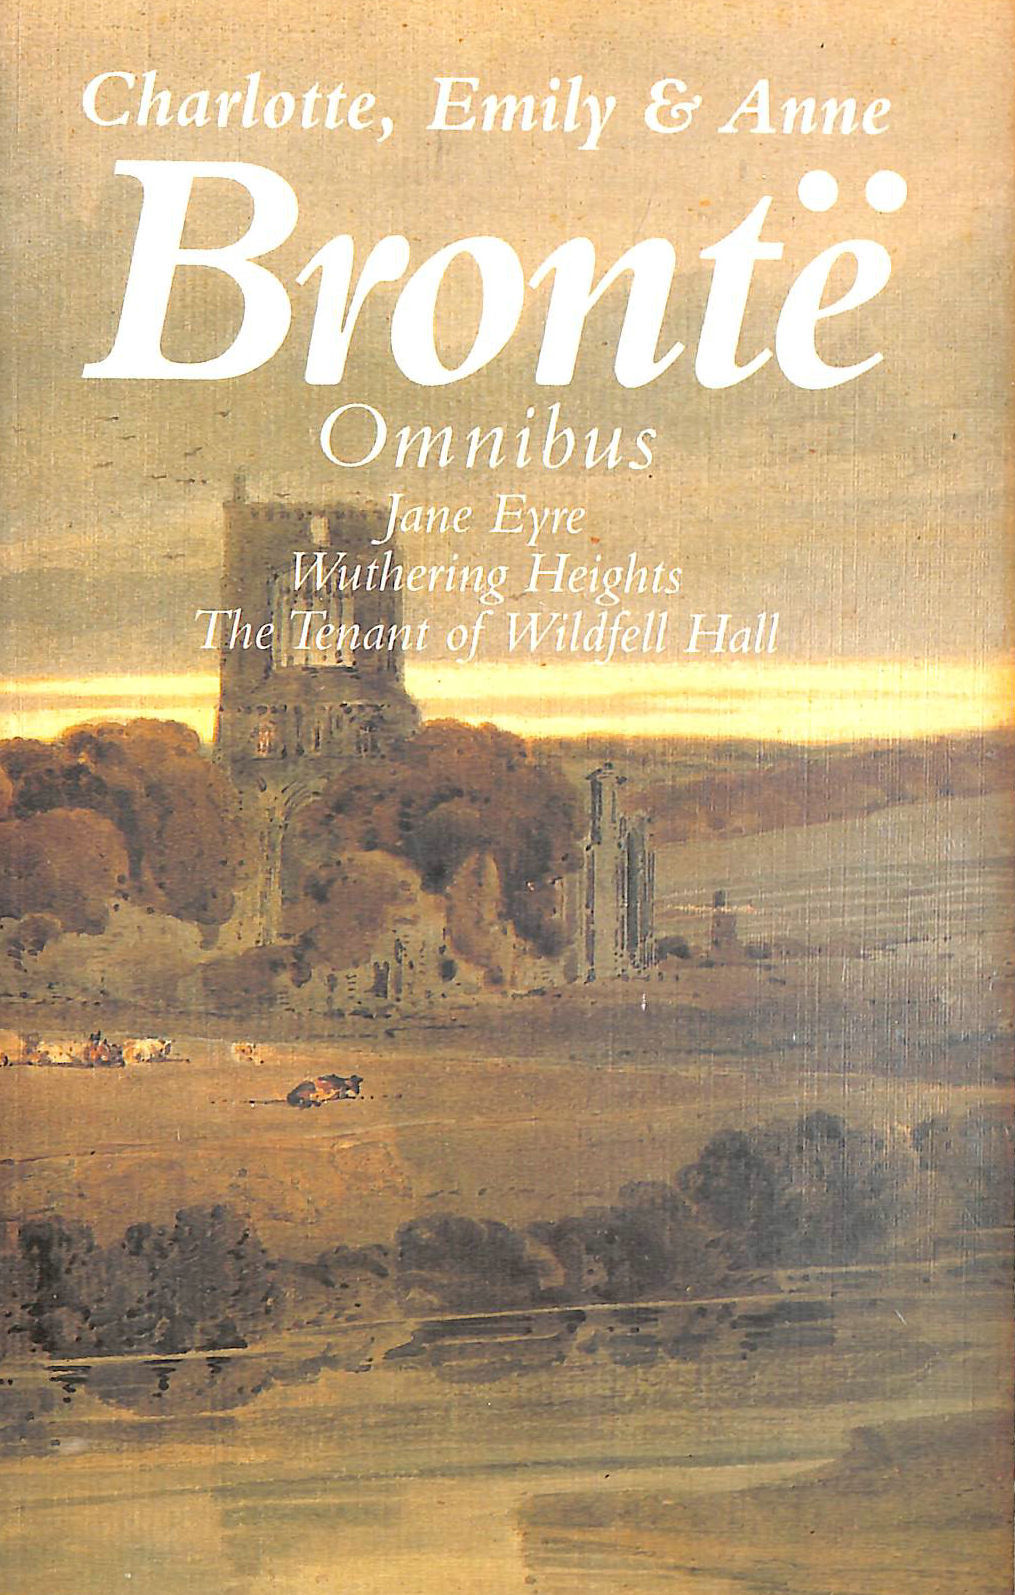 CHARLOTTE, EMILY & ANNE BRONTE - Bronte Omnibus, Jane Eyre, Wuthering Heights, The Tenant of Wildfell Hall